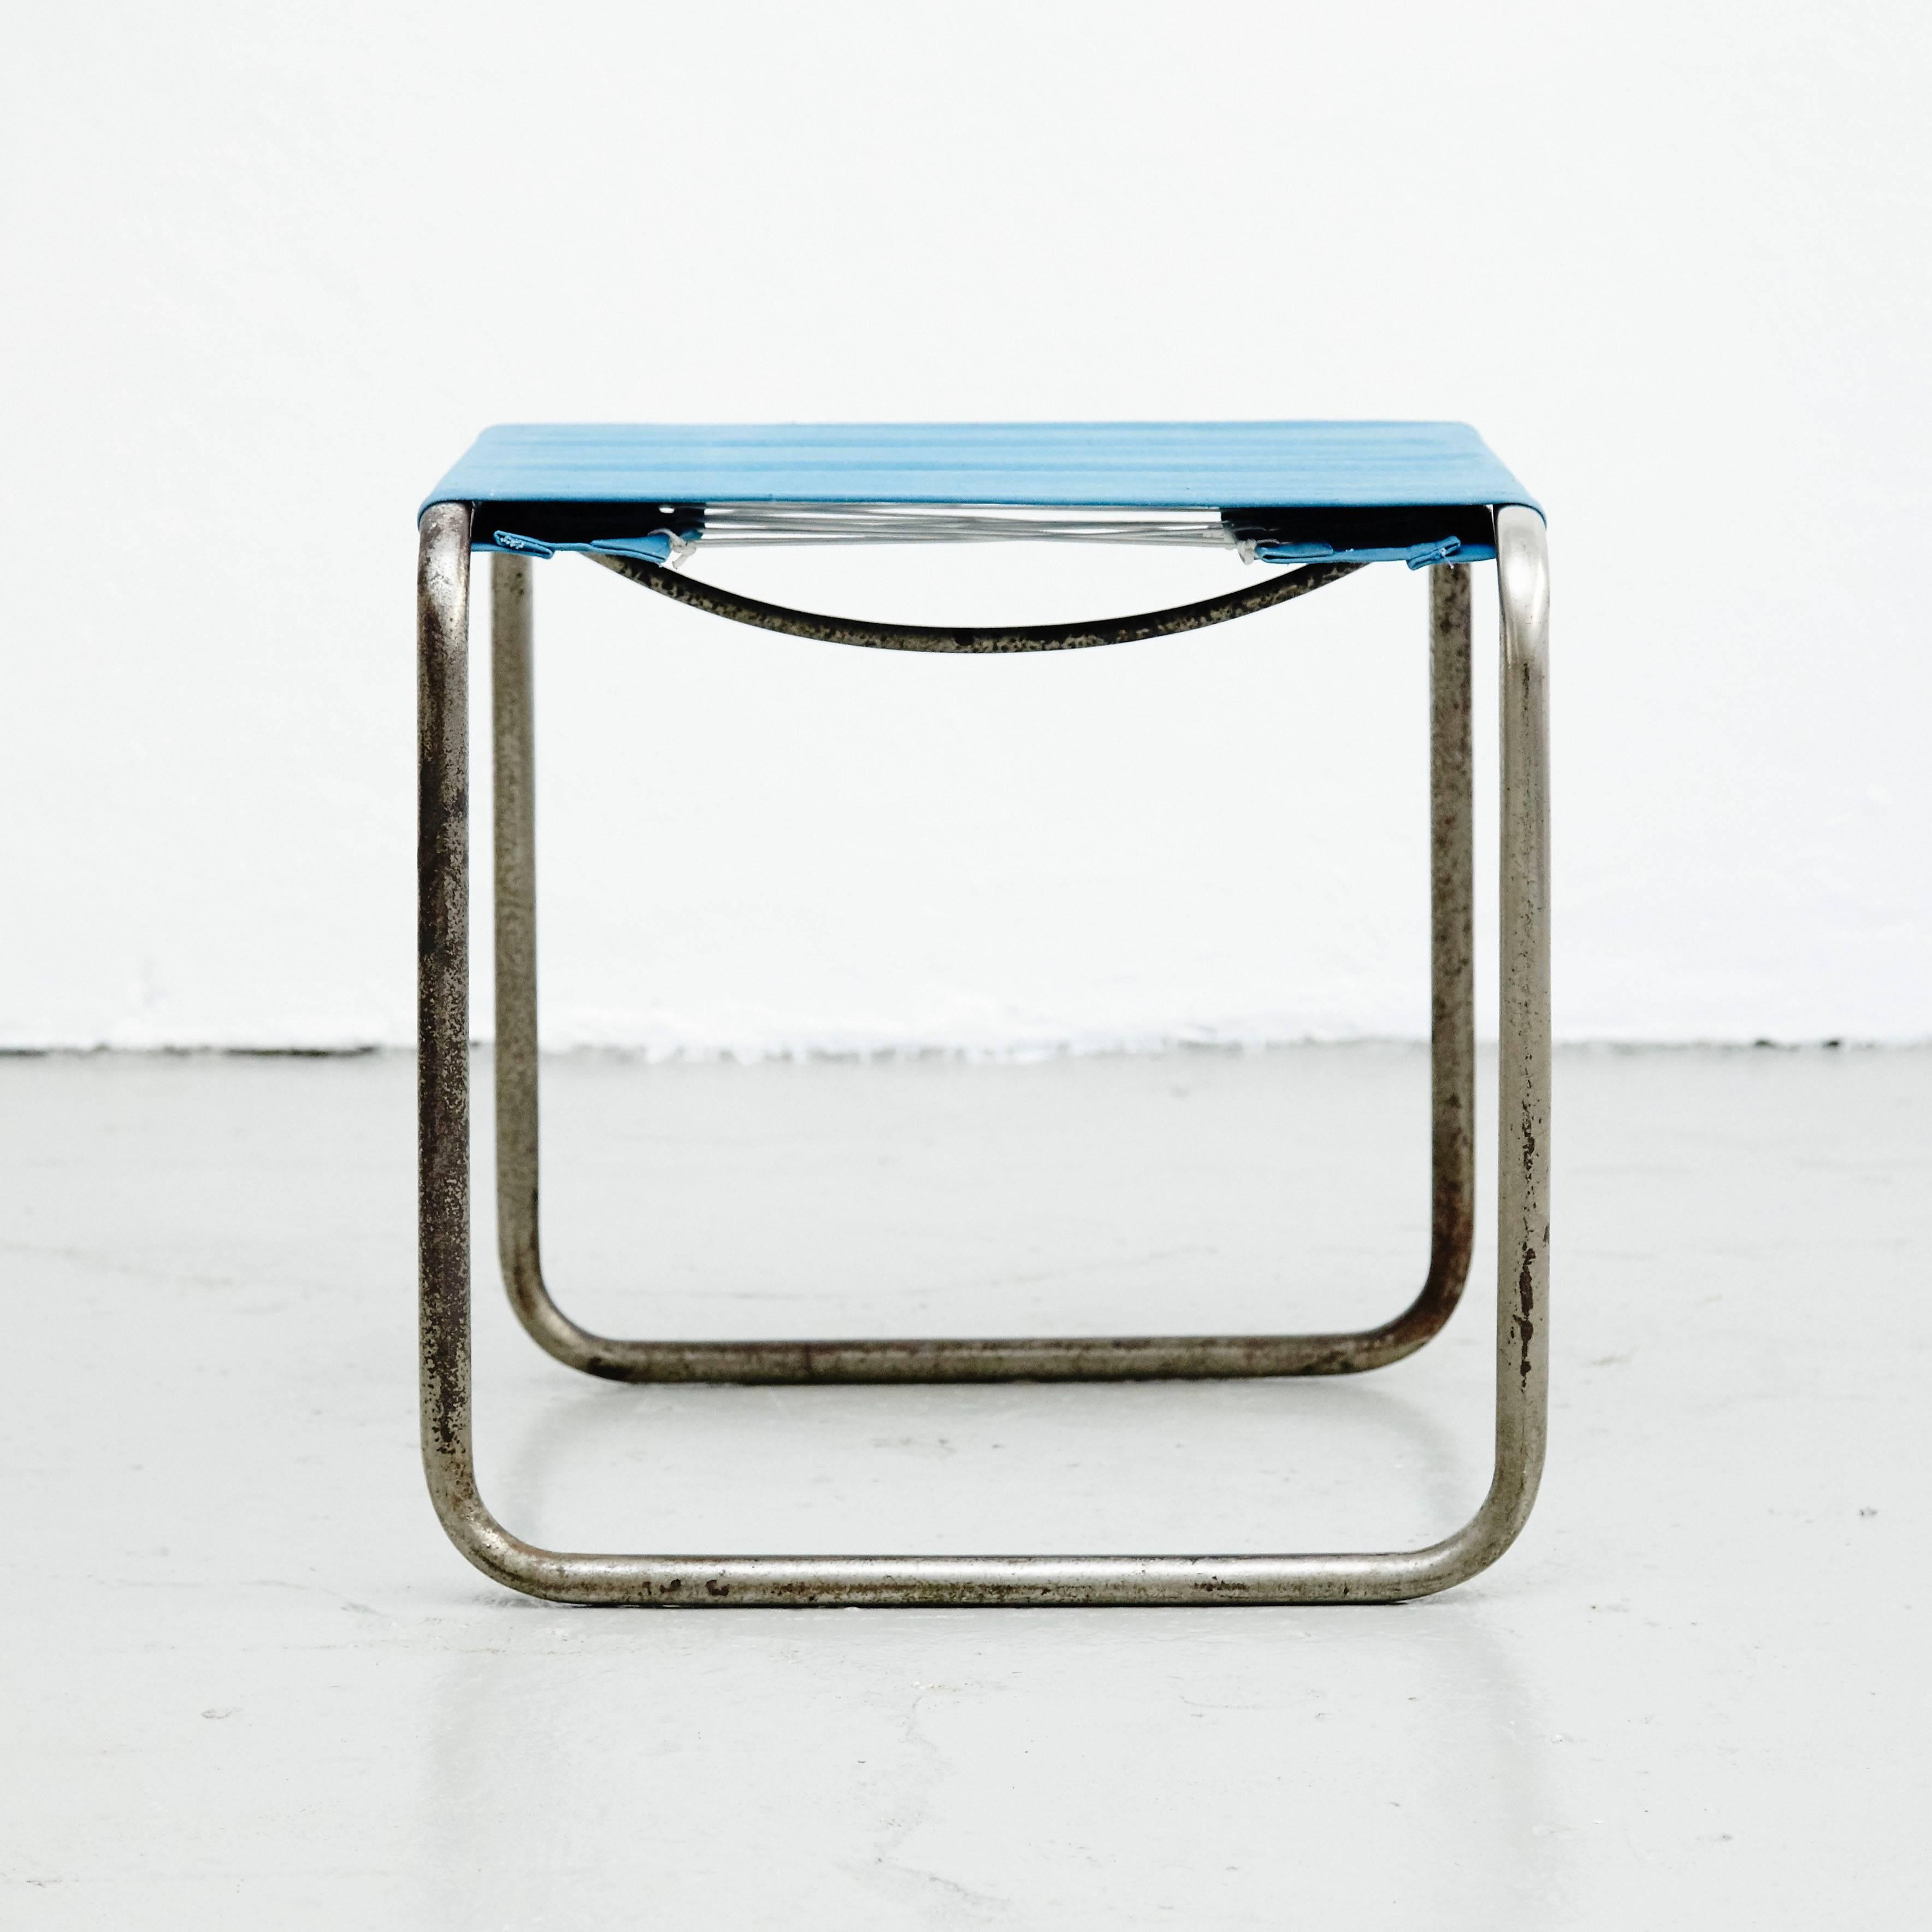 Marcel Breuer B9T Stool for Thonet with Blue Fabric and Metal Tube, circa 1930 (Mitte des 20. Jahrhunderts)